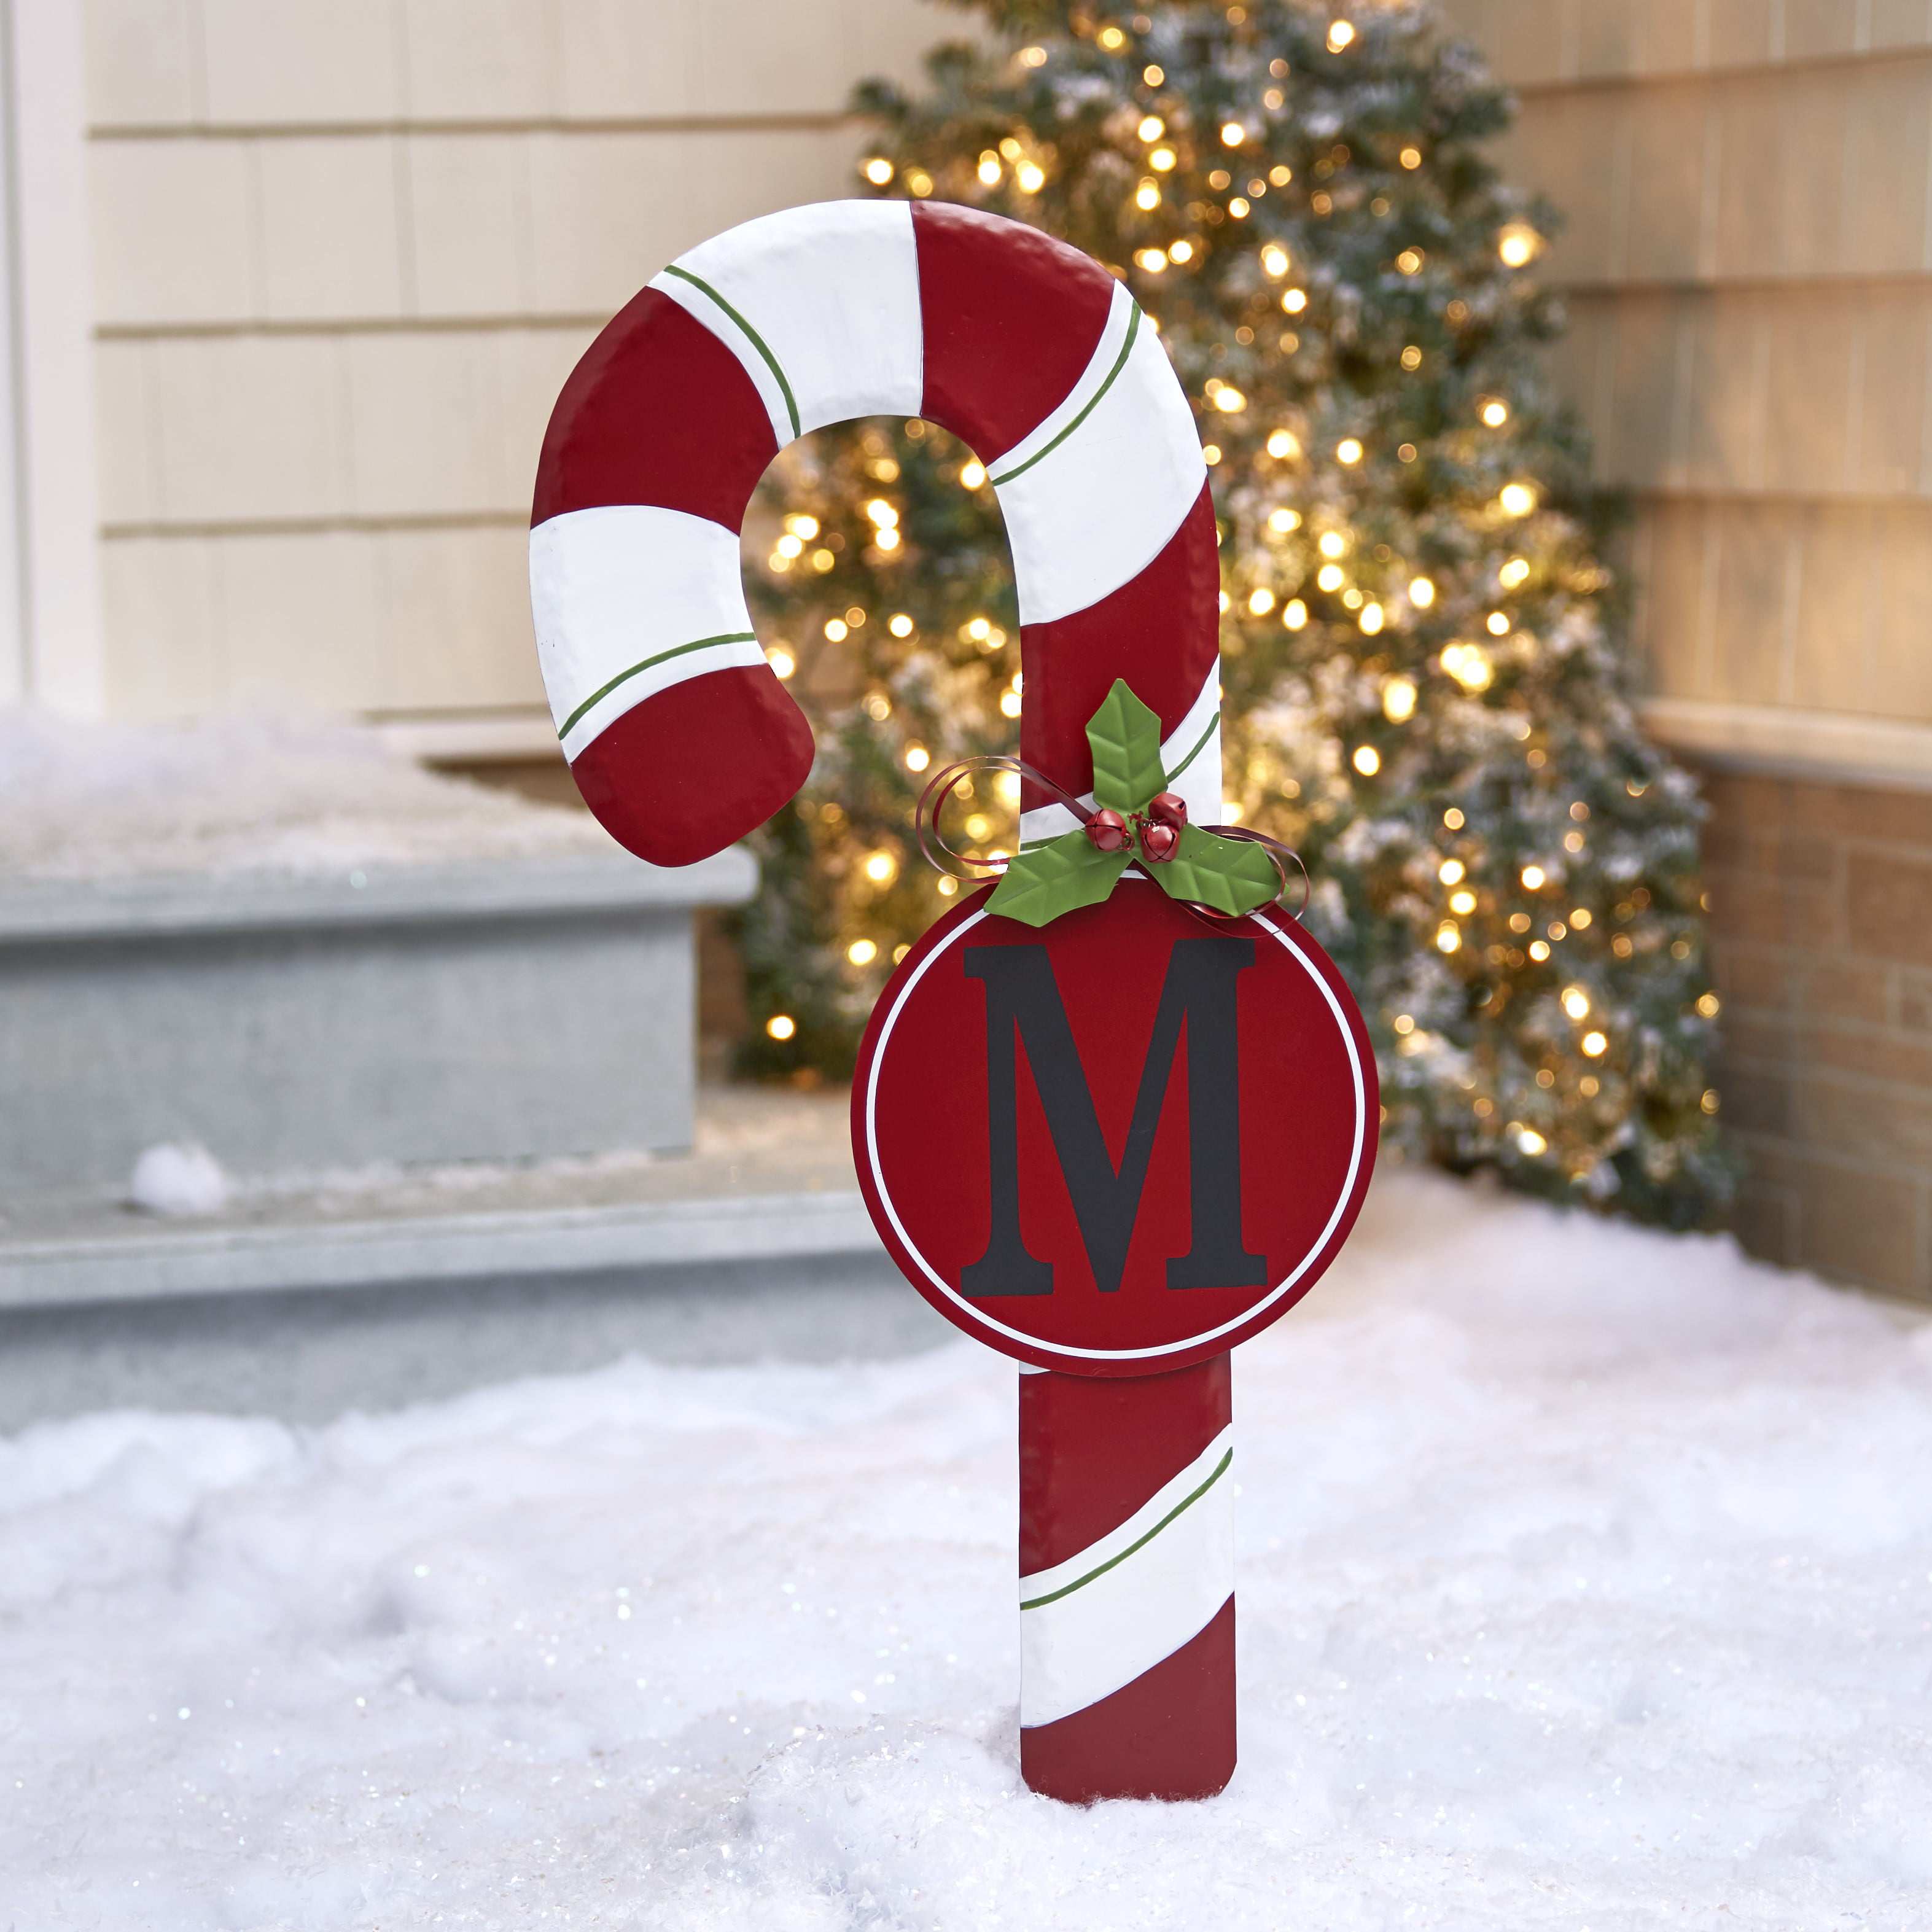 4 Ft Tall Solar Powered Lighted Christmas Candy Cane Yard Wind Spinner 